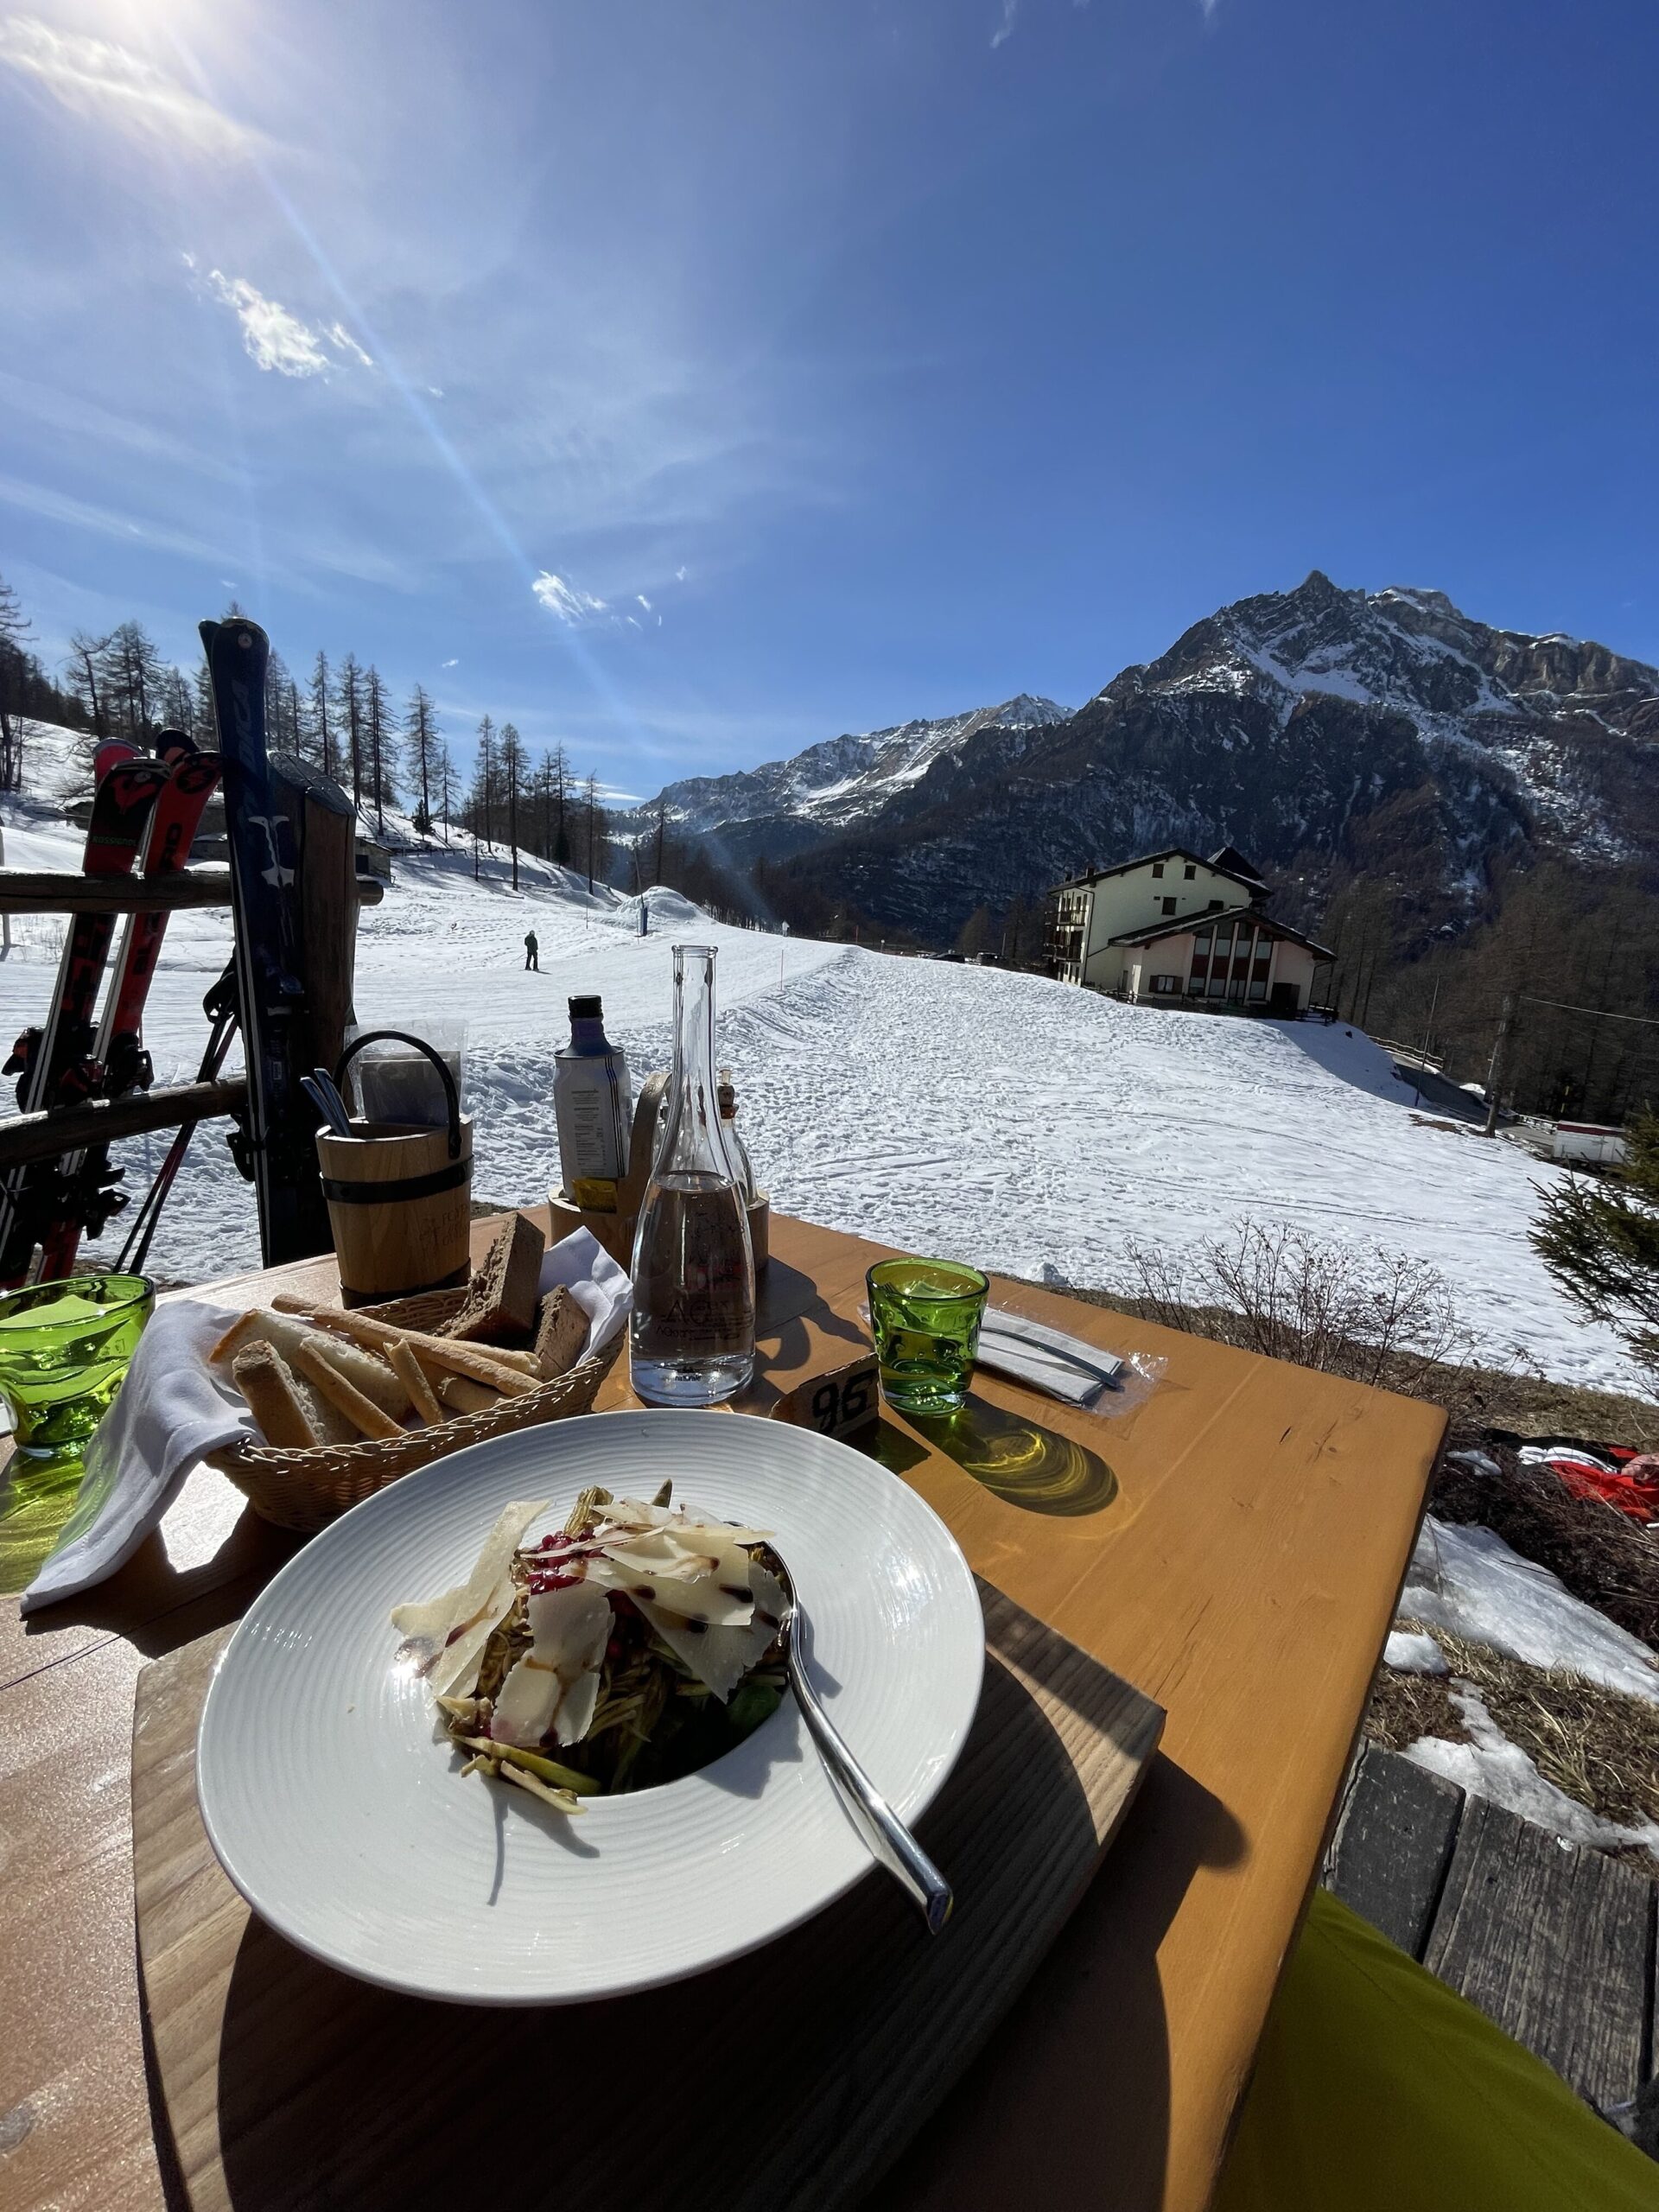 a table with food and drinks on it in the snow